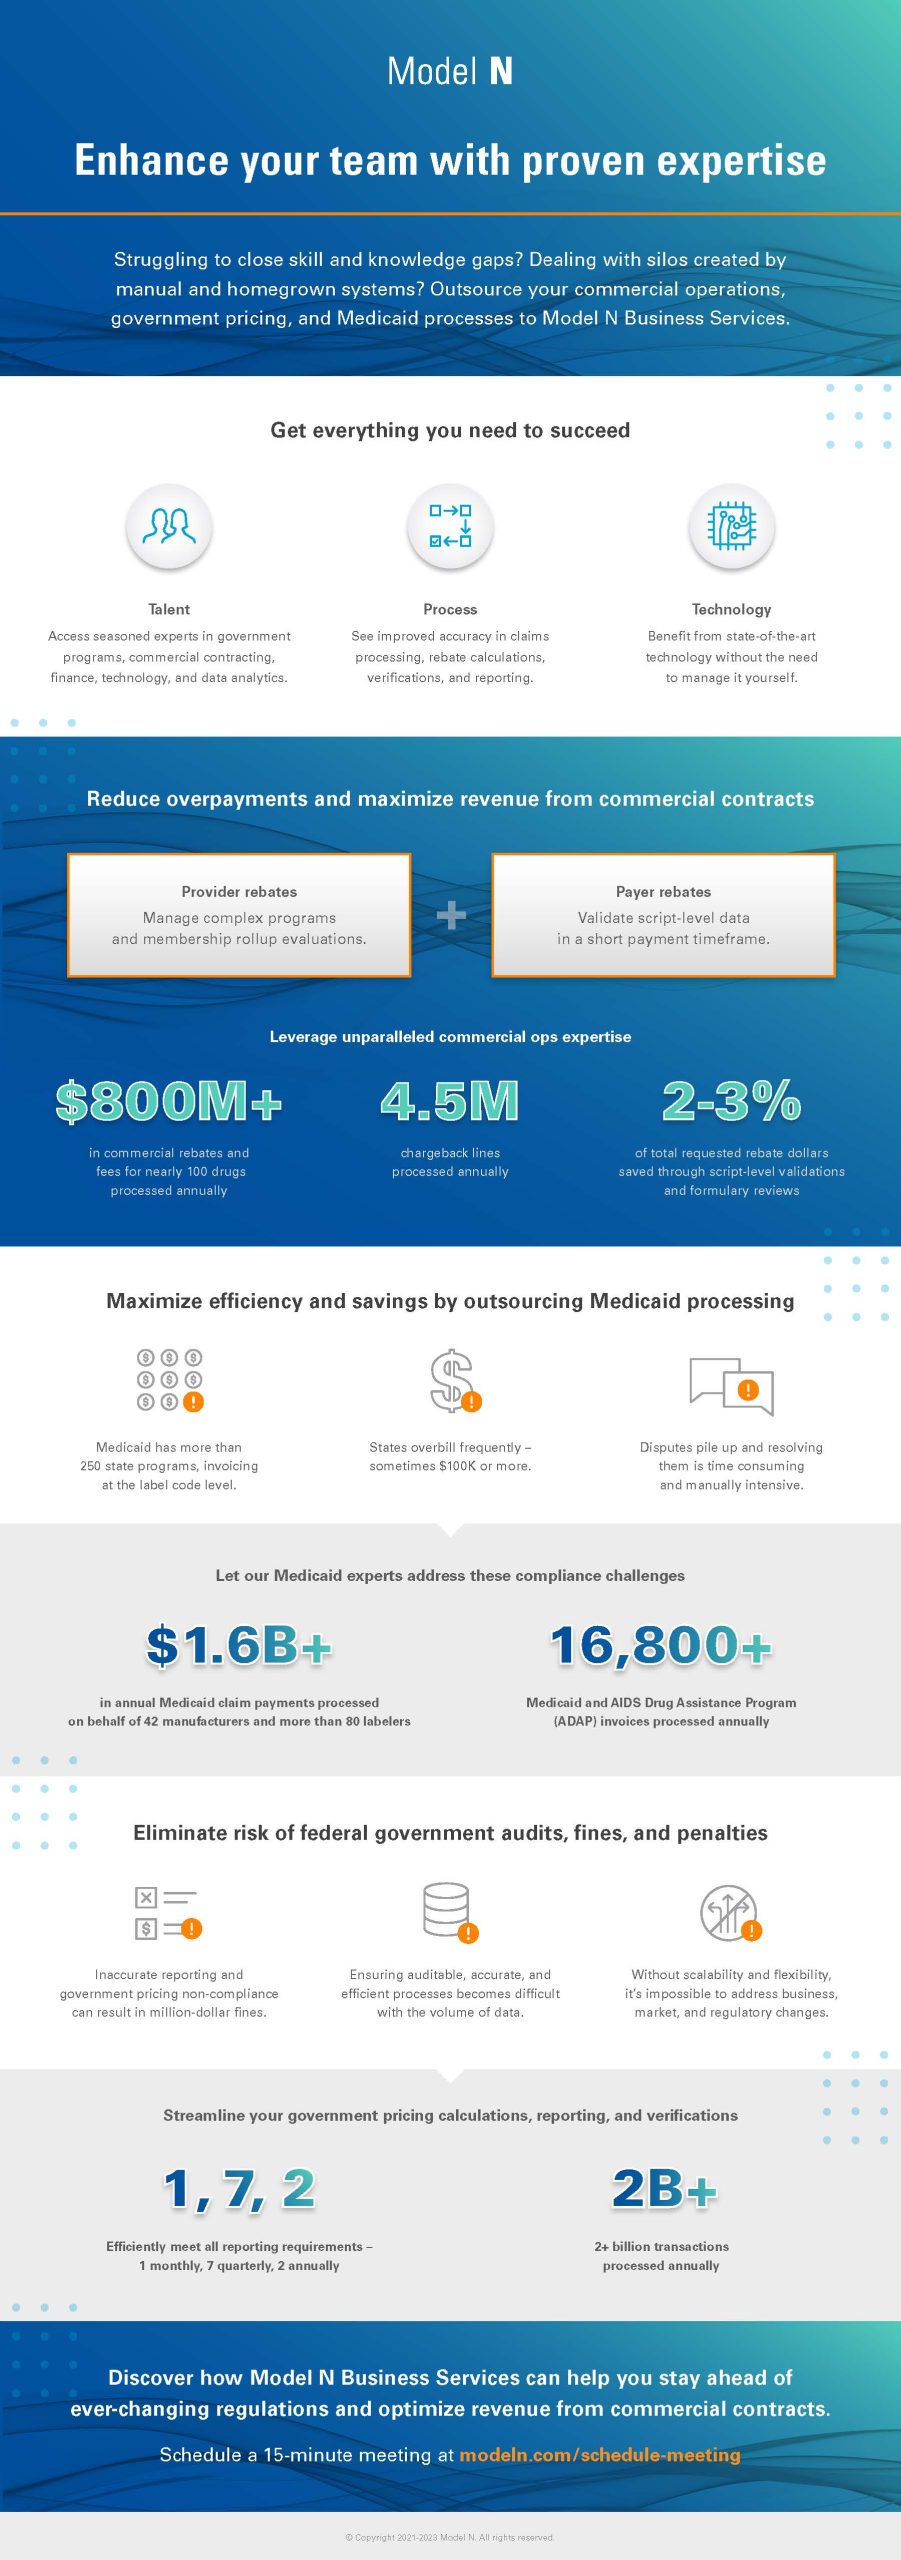 model-n-business-services-infographic-2023